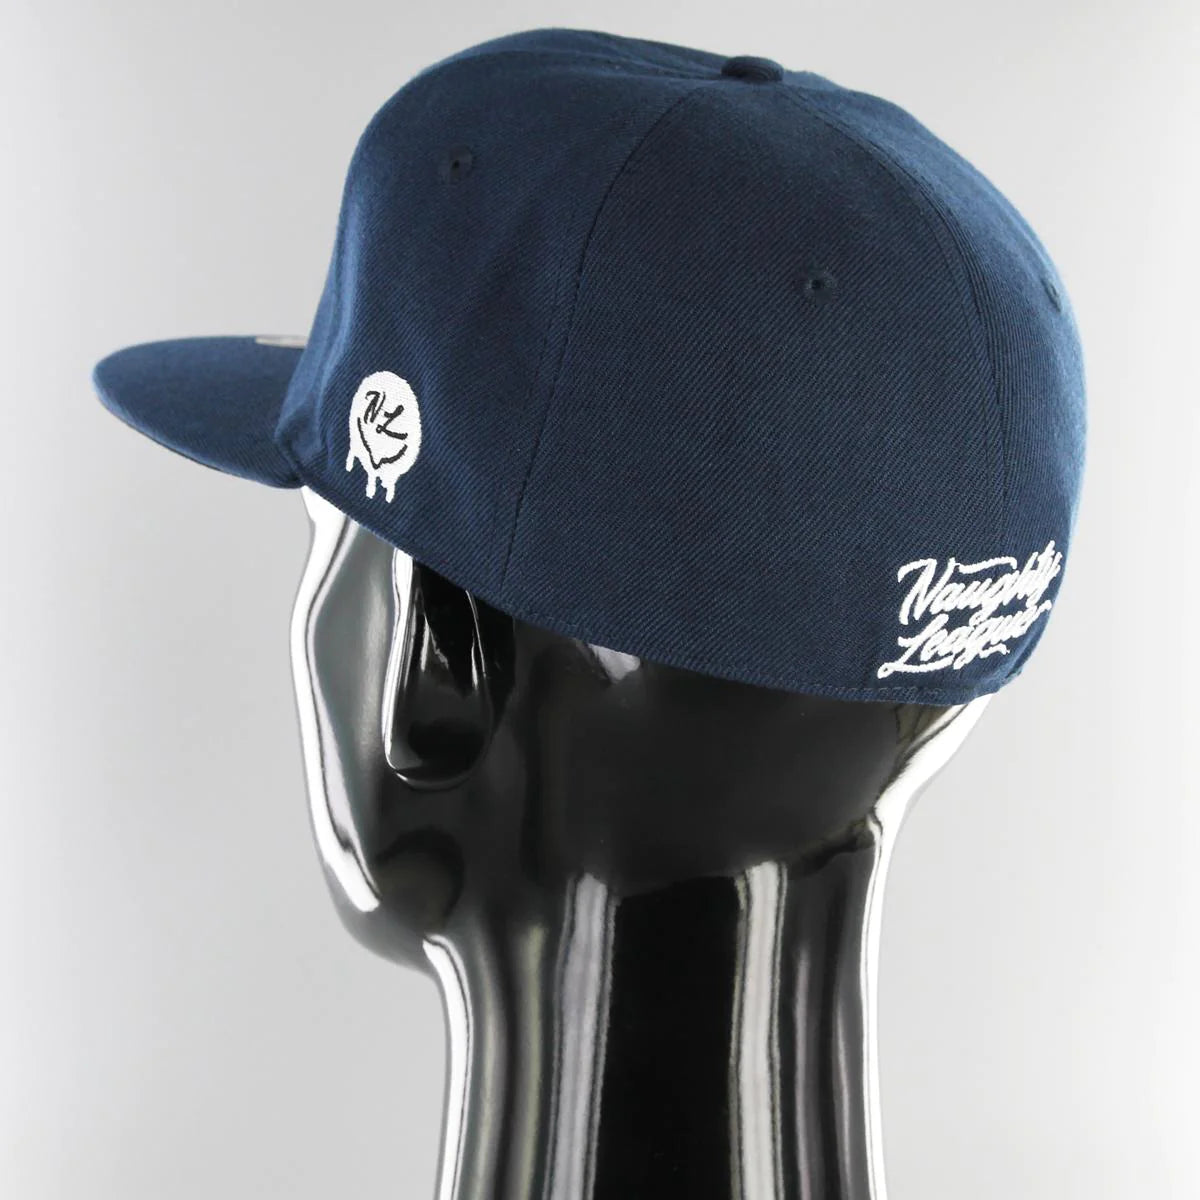 South Central Original Gangsters fitted navy/orange